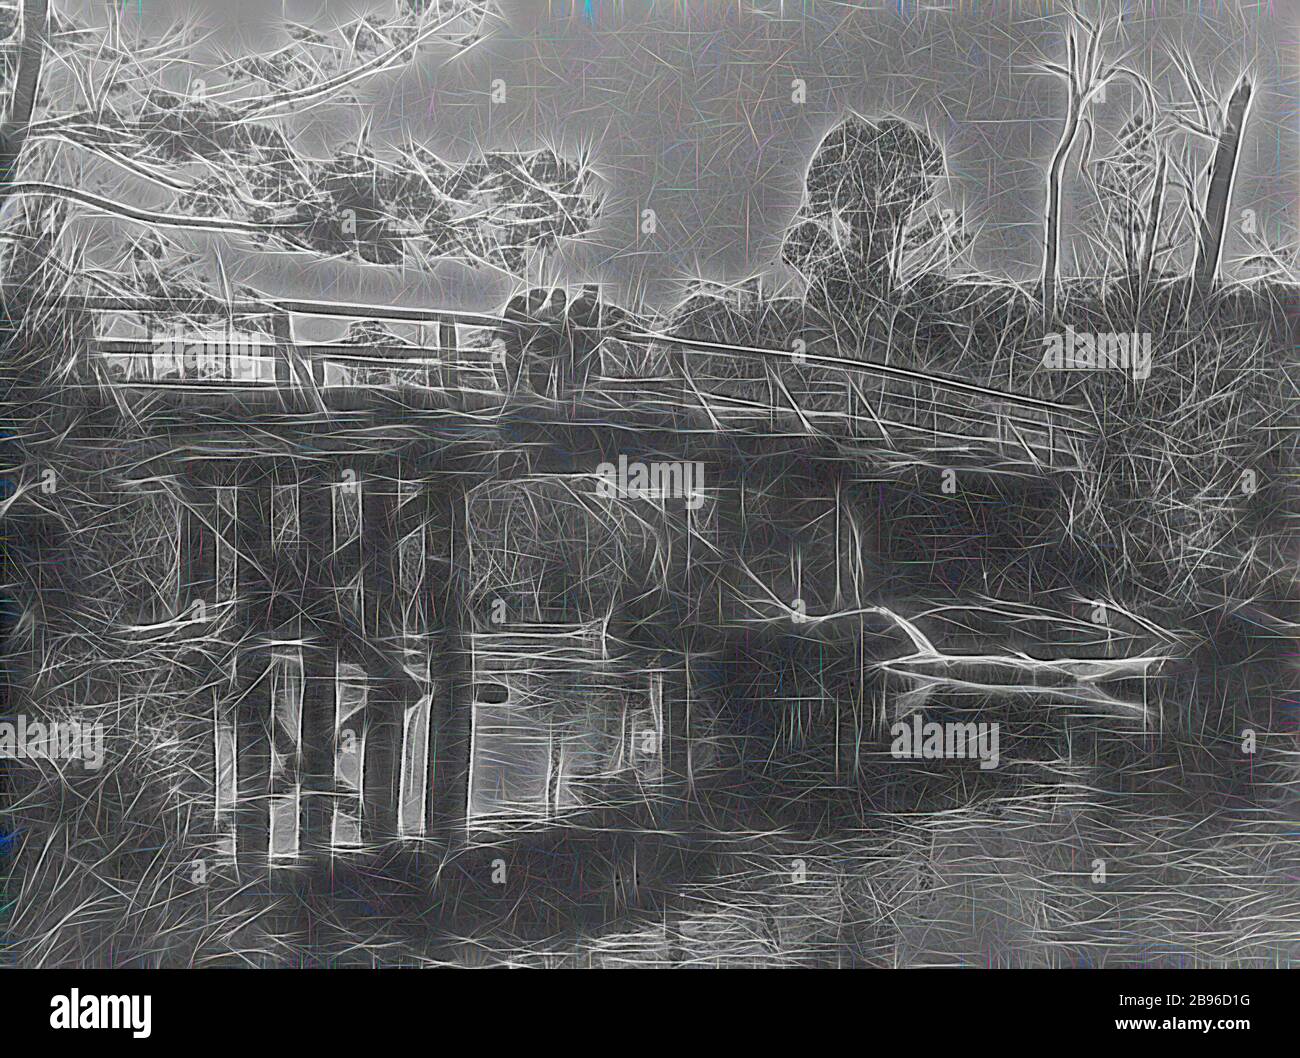 Negative - Patersonia (?), Tasmania, 1902, Group of people on an old timber bridge over the St Patrick's River., Reimagined by Gibon, design of warm cheerful glowing of brightness and light rays radiance. Classic art reinvented with a modern twist. Photography inspired by futurism, embracing dynamic energy of modern technology, movement, speed and revolutionize culture. Stock Photo